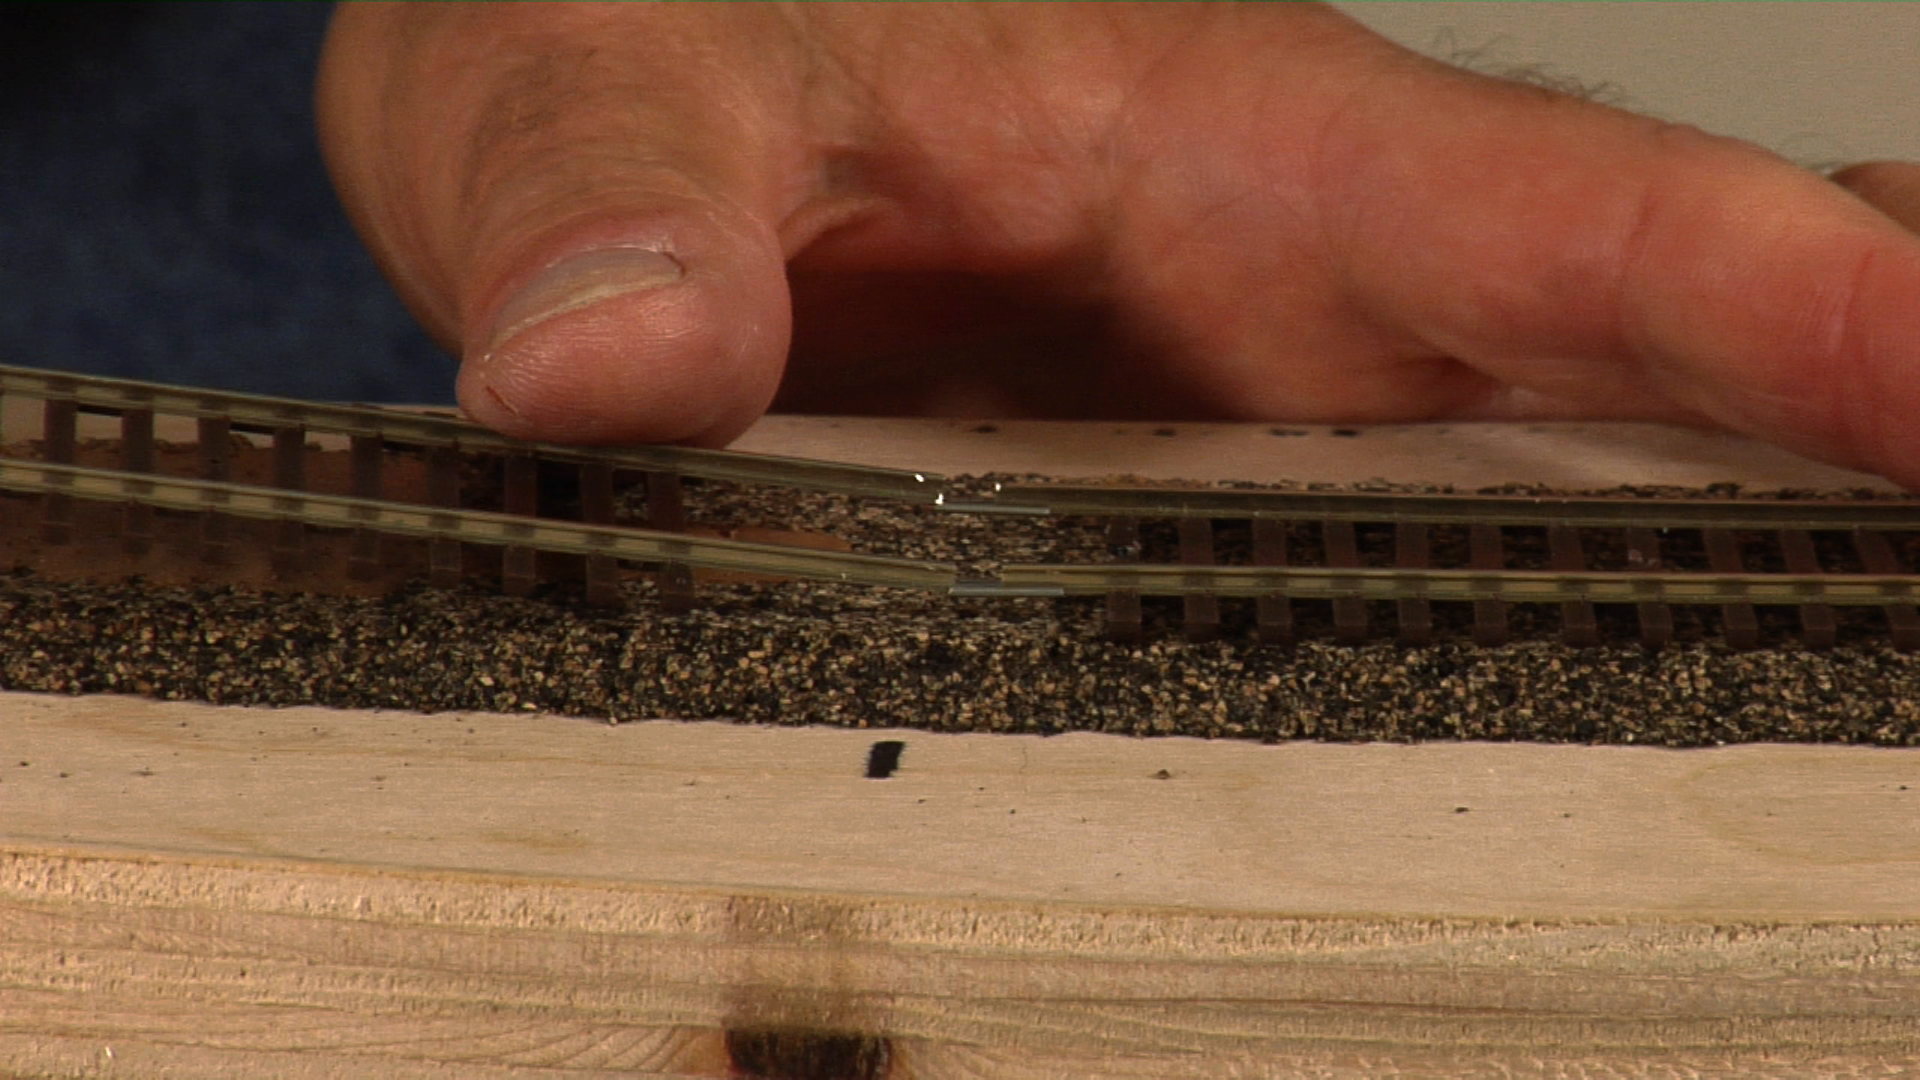 Tips and Tricks for Laying Model Railroad Flex-Track product featured image thumbnail.